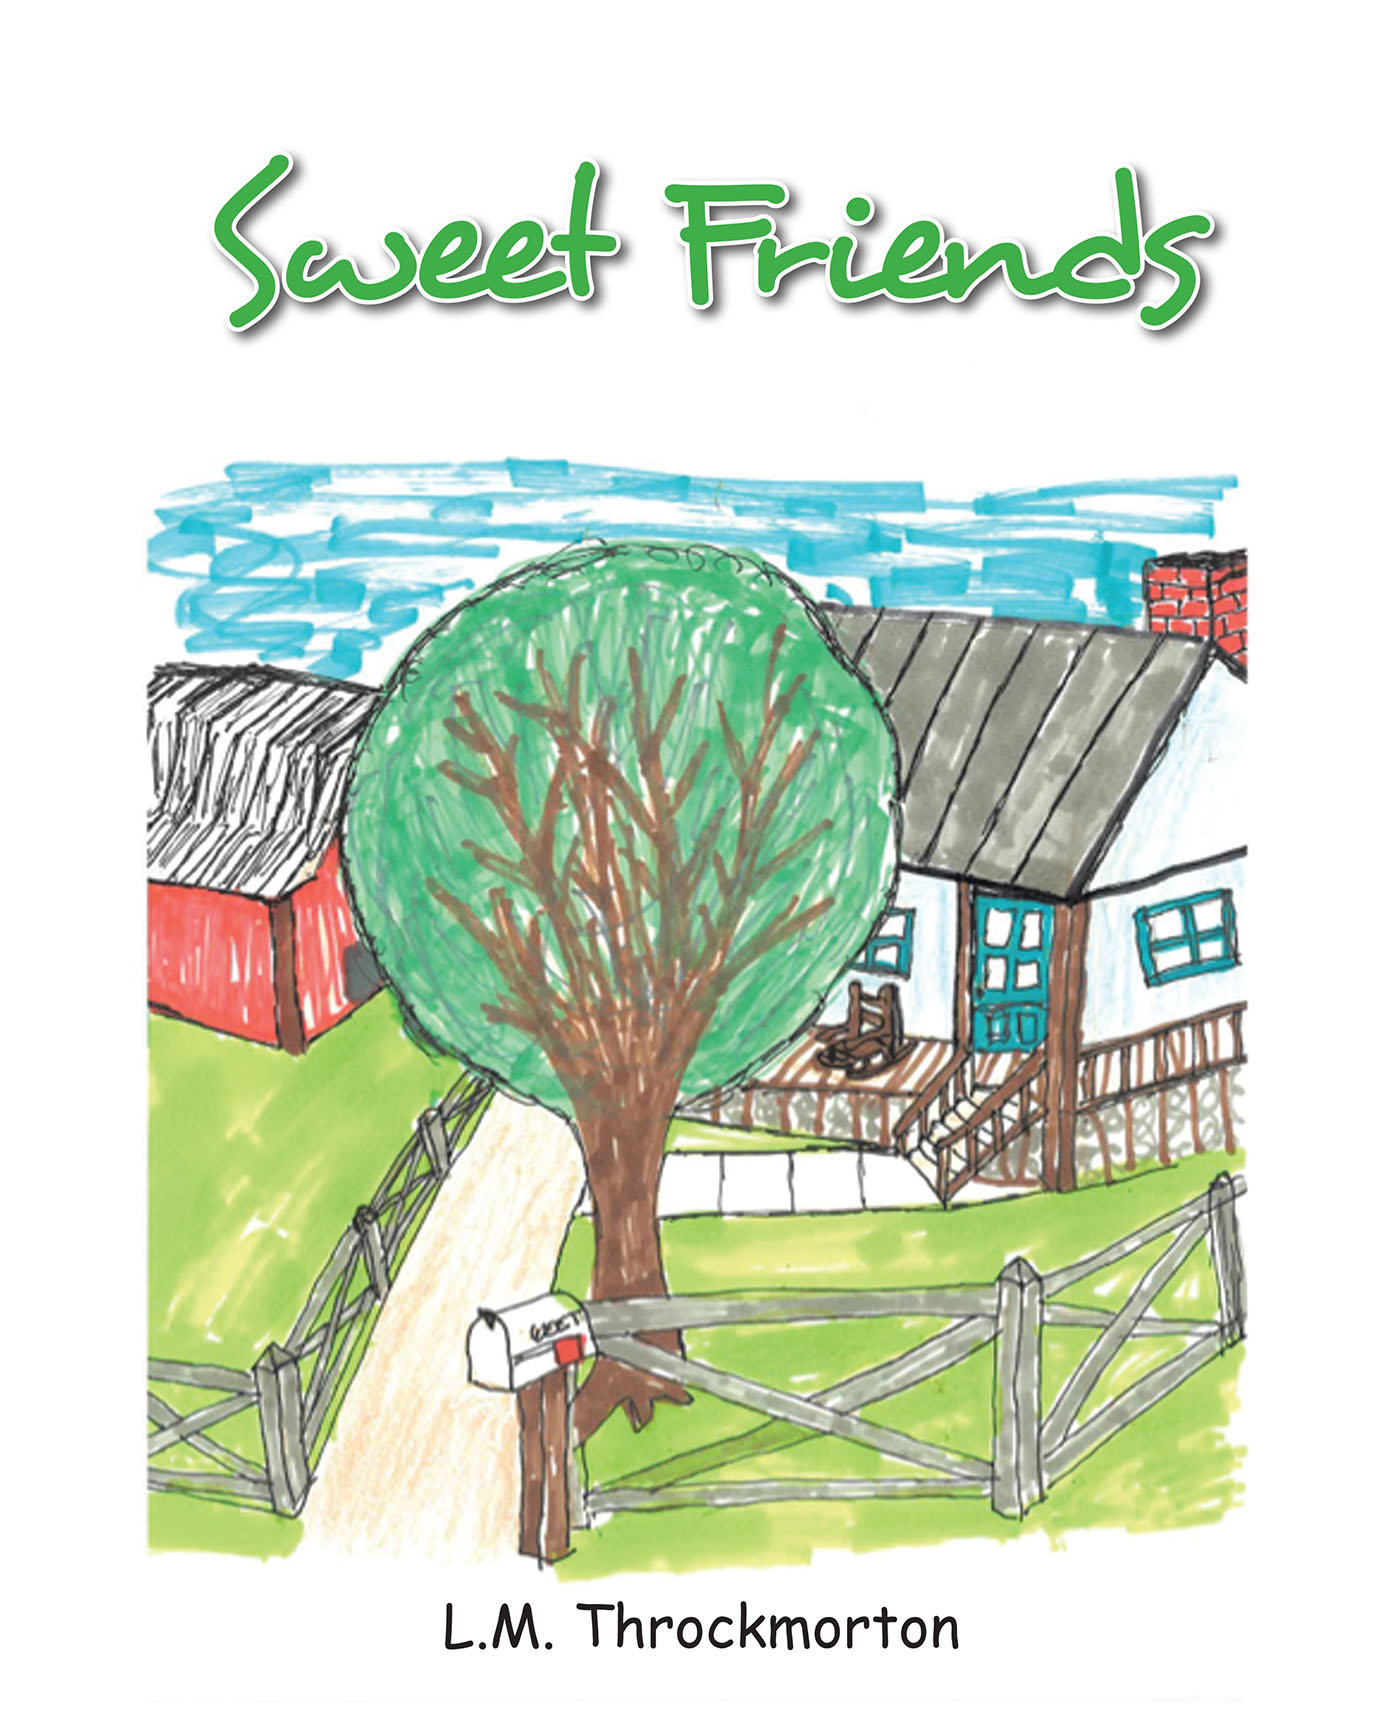 L.M. Throckmorton’s Newly Released “SWEET FRIENDS” is a Charming Tale of Friendship and Adventure on a Family Farm